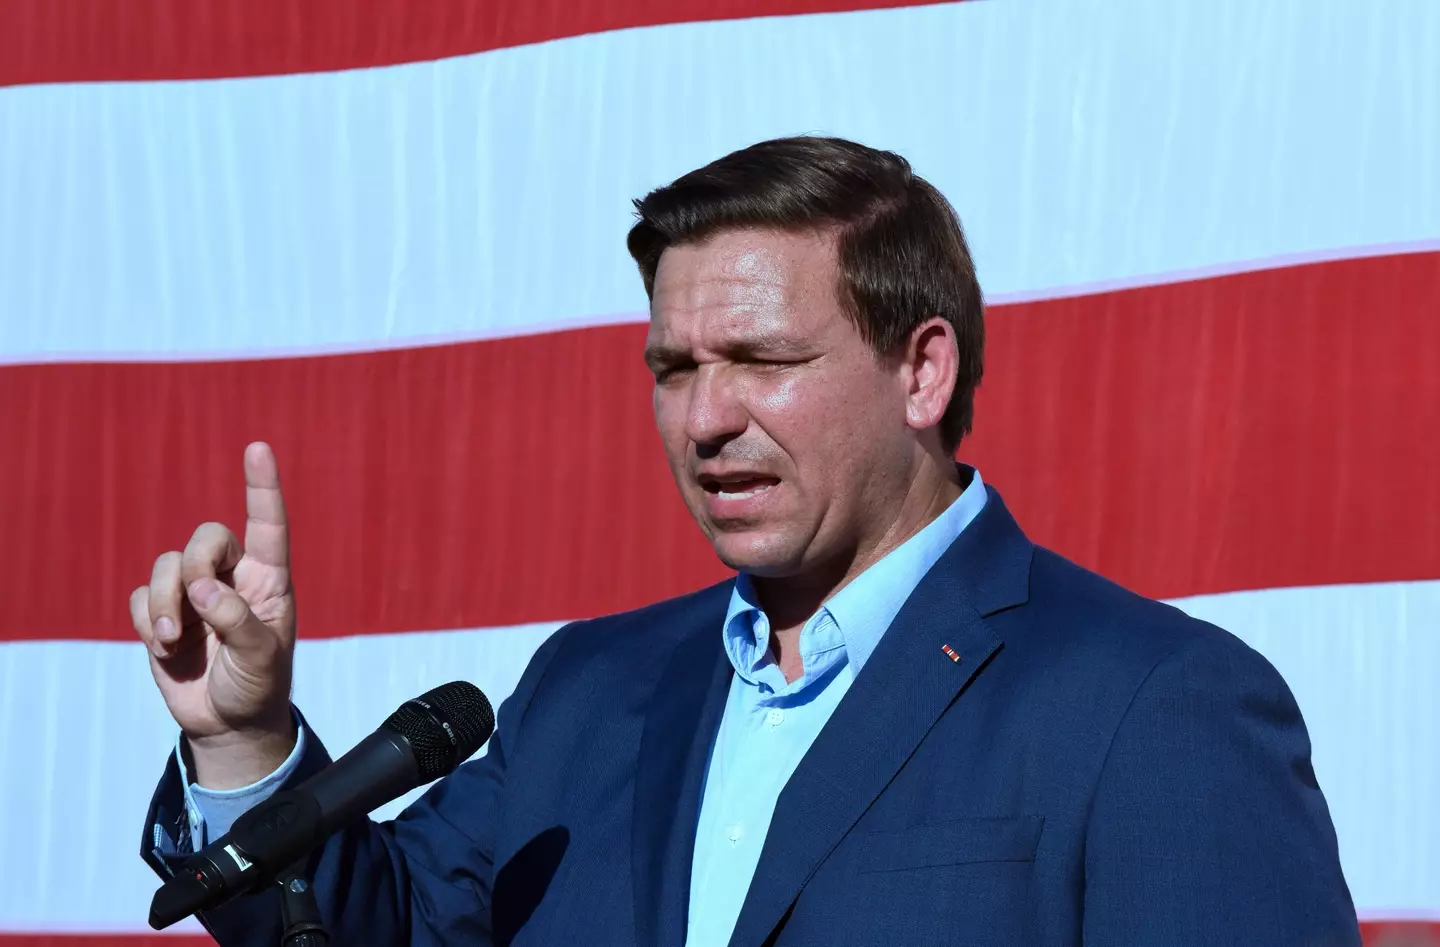 In March, Ron DeSantis signed the ‘Don’t Say Gay’ bill into law.